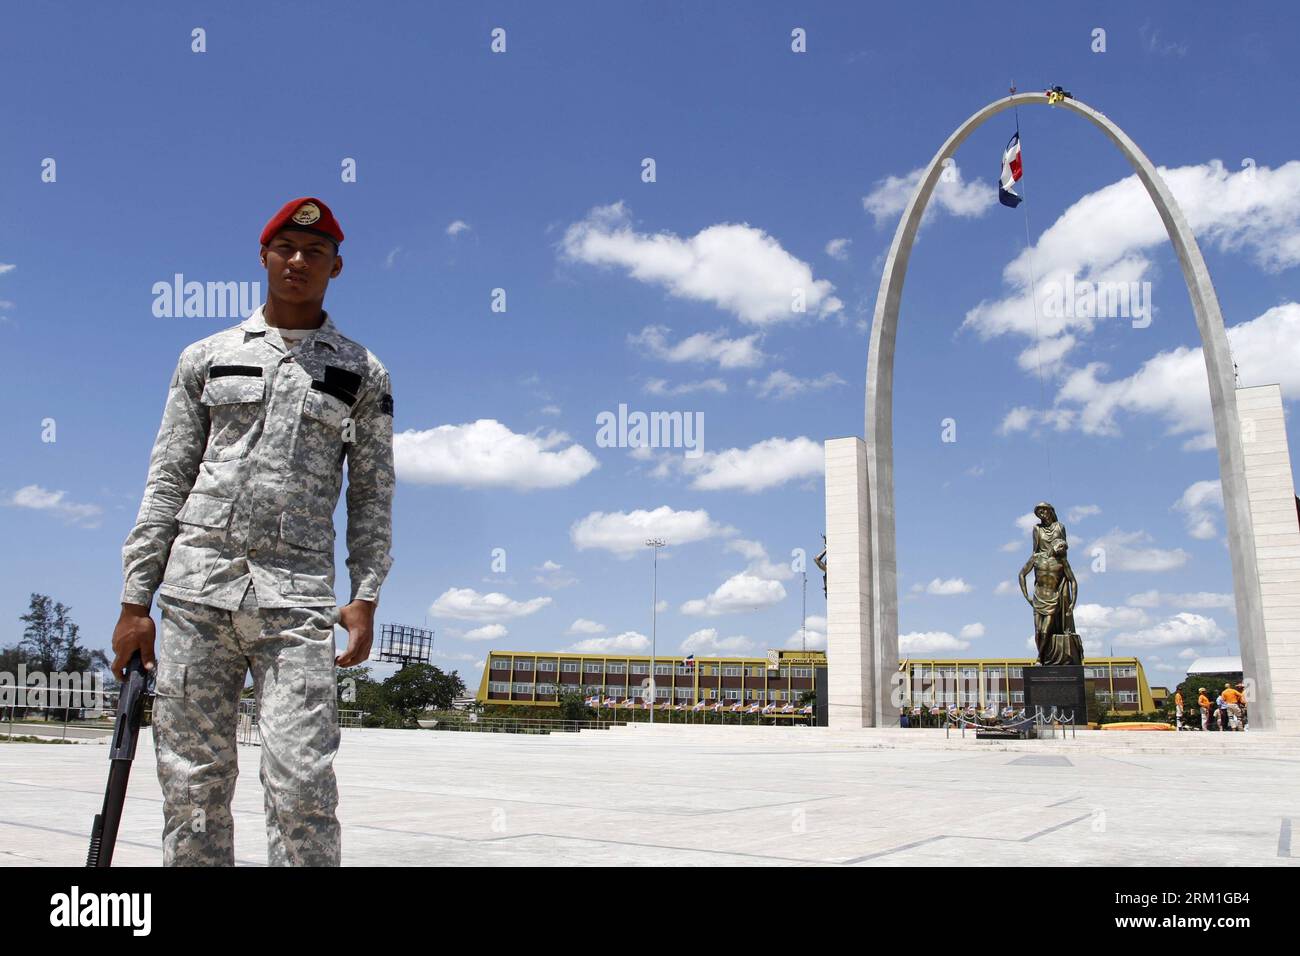 Bildnummer: 59578085  Datum: 27.04.2013  Copyright: imago/Xinhua A soldier guards as Doctor Demetrio Wasar Gomez (R, top) protests againt mining company Barrick Gold, at Plaza de la Bandera (the Flag s Square), in Santo Domingo, Dominican Republic, on April 27, 2013. According to the local press, Demetrio Wasar Gomez demands that the State s contract with Barrick Gold be revised, and the protection of natural resources in Pueblo Viejo Cotui, the area that will be mined. (Xinhua/Roberto Guzman) DOMINICAN REPUBLIC-SANTO DOMINGO-PROTEST PUBLICATIONxNOTxINxCHN Militär x0x xds 2013 quer     5957808 Stock Photo